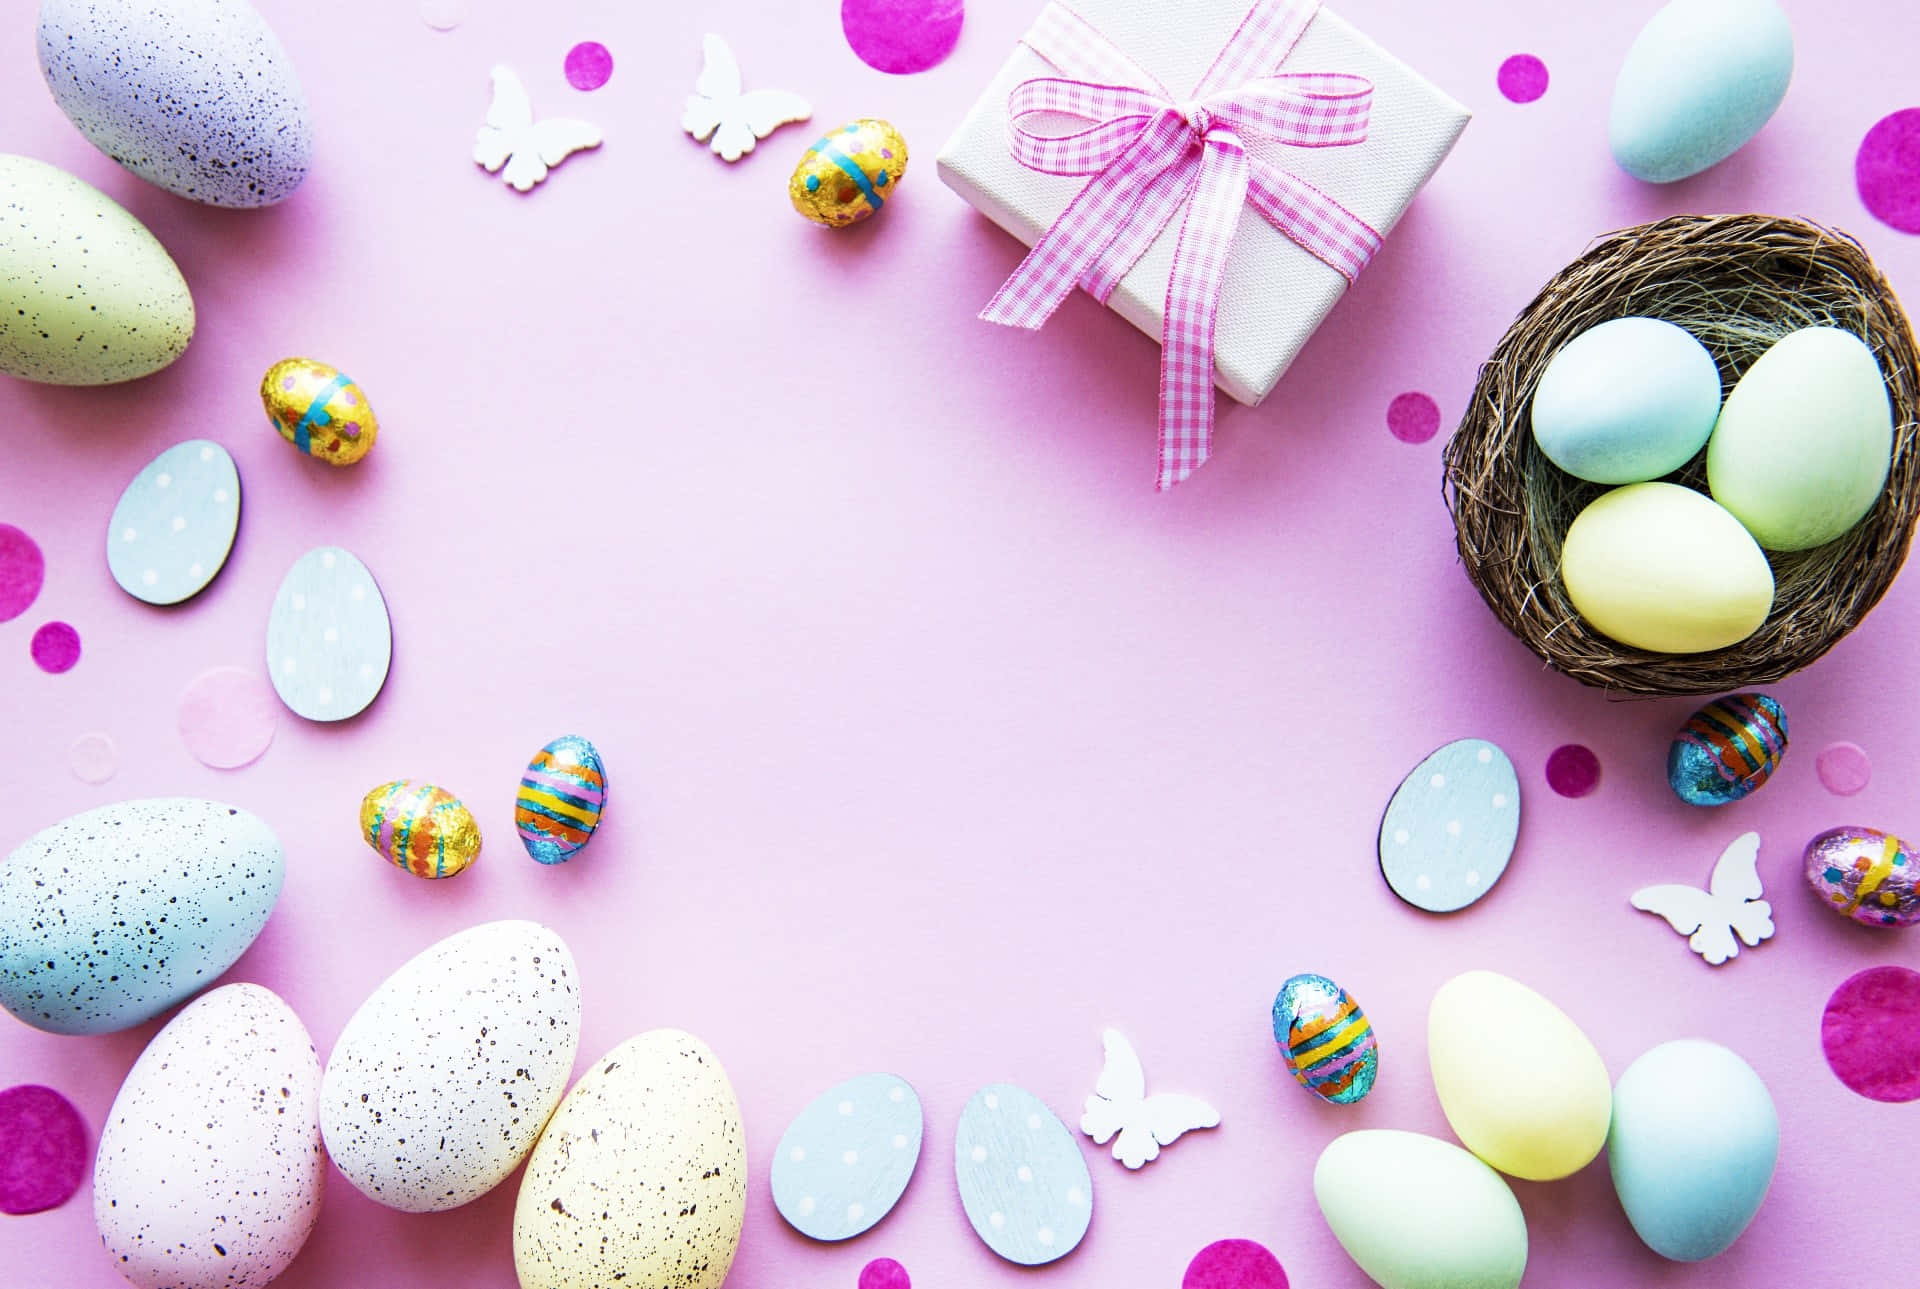 Adorable Easter Bunnies with Colorful Eggs and Flowers